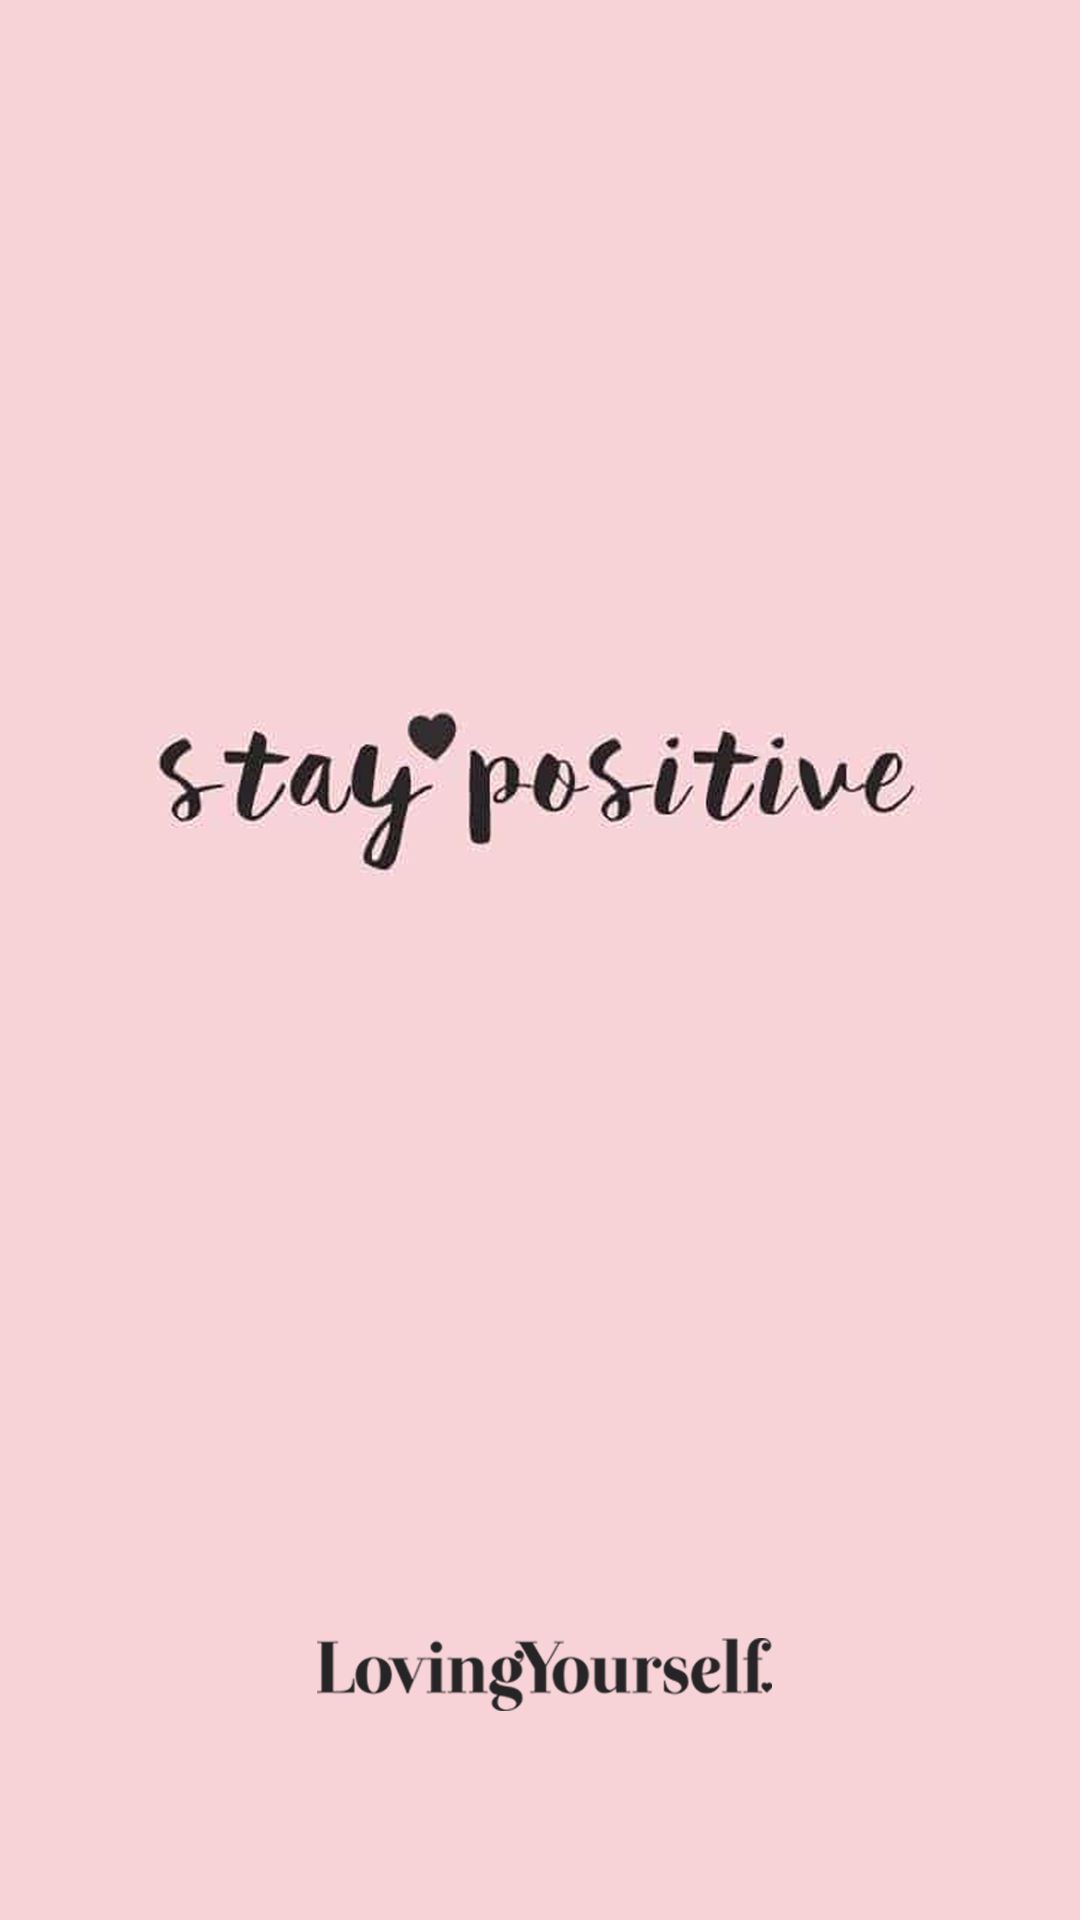 Stay Positive Wallpaper. Positive wallpaper, Positivity, Daily motivational quotes